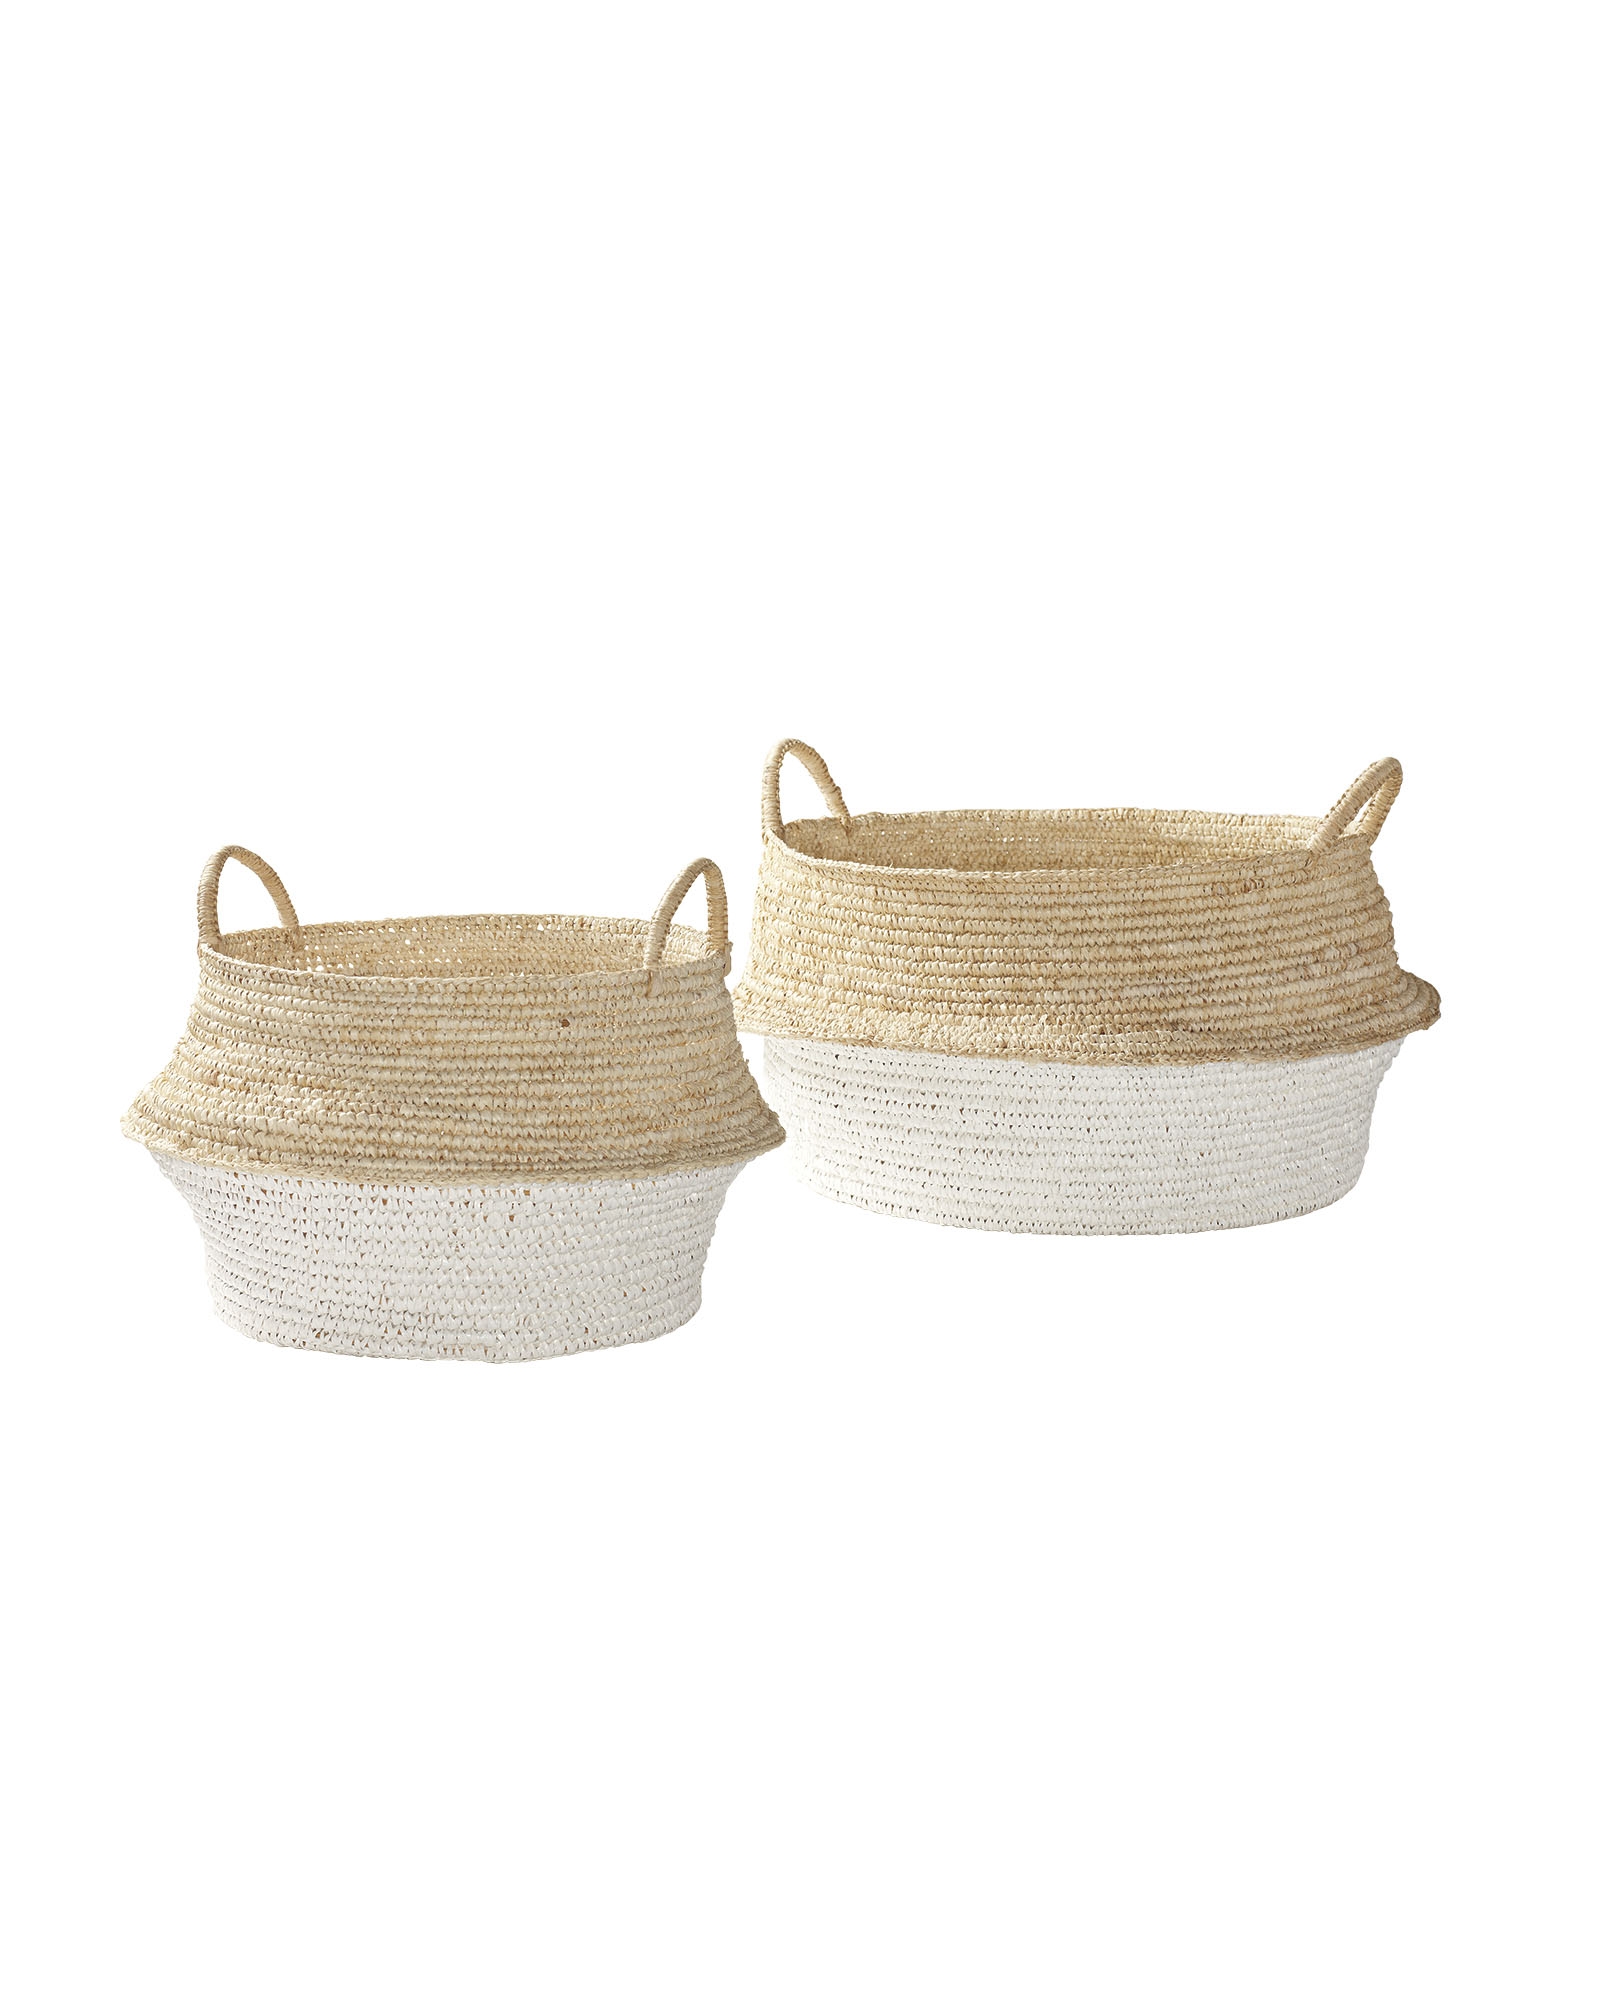 Round Belly Baskets - Set of 2 - Image 0